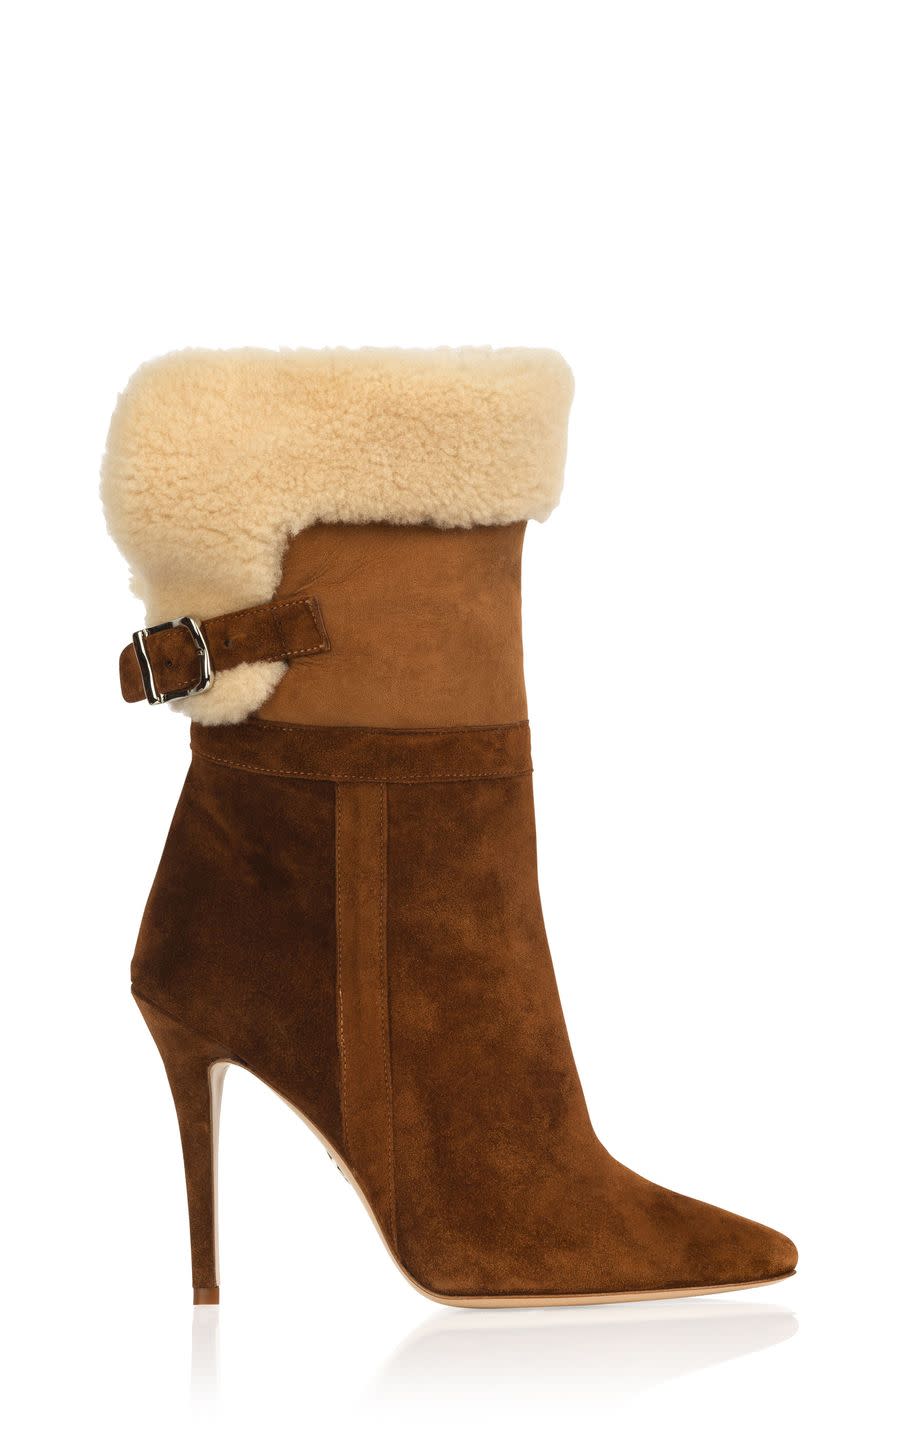 19) The Shearling: Brother Vellies